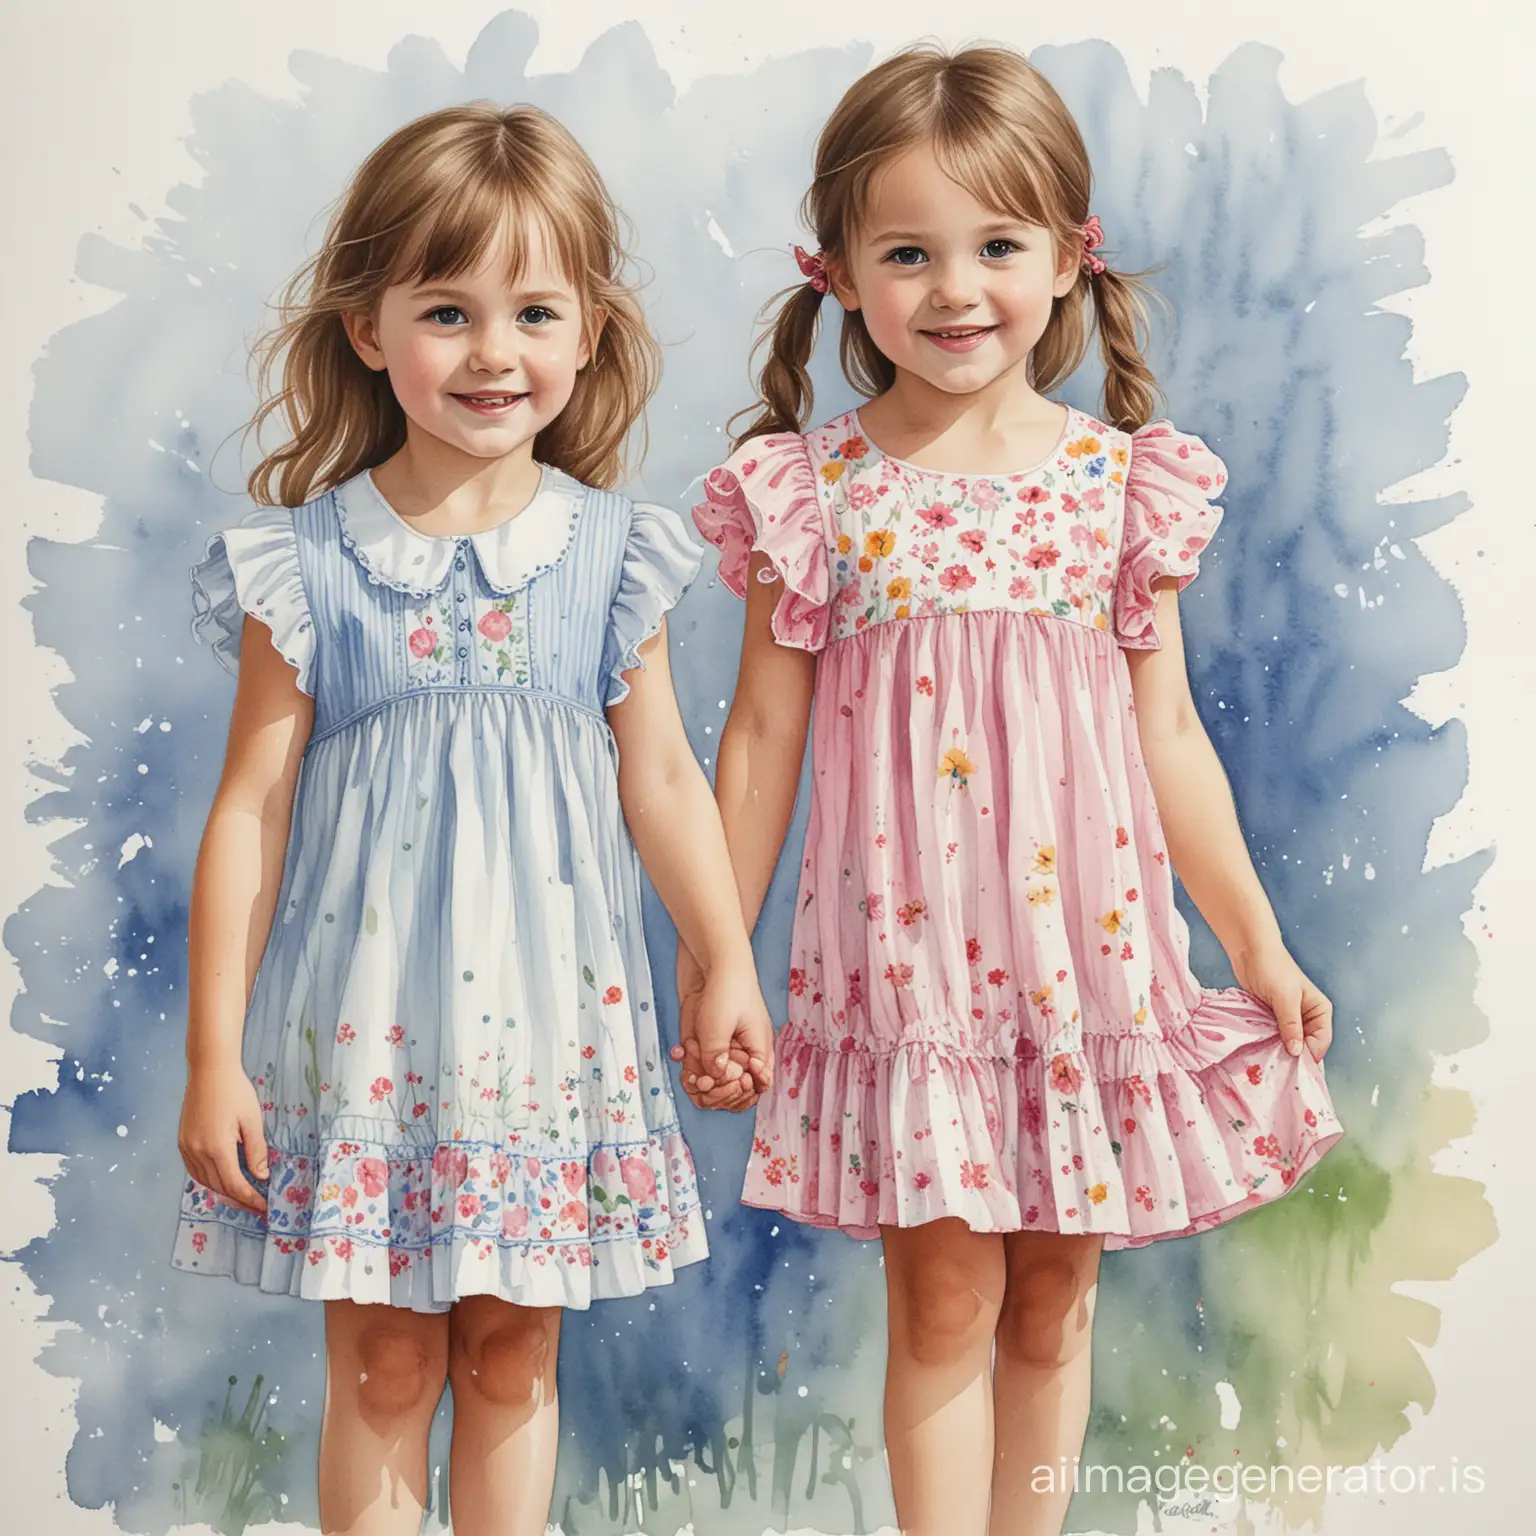 Watercolor-Illustration-of-Two-5YearOld-Girls-in-Summer-Attire